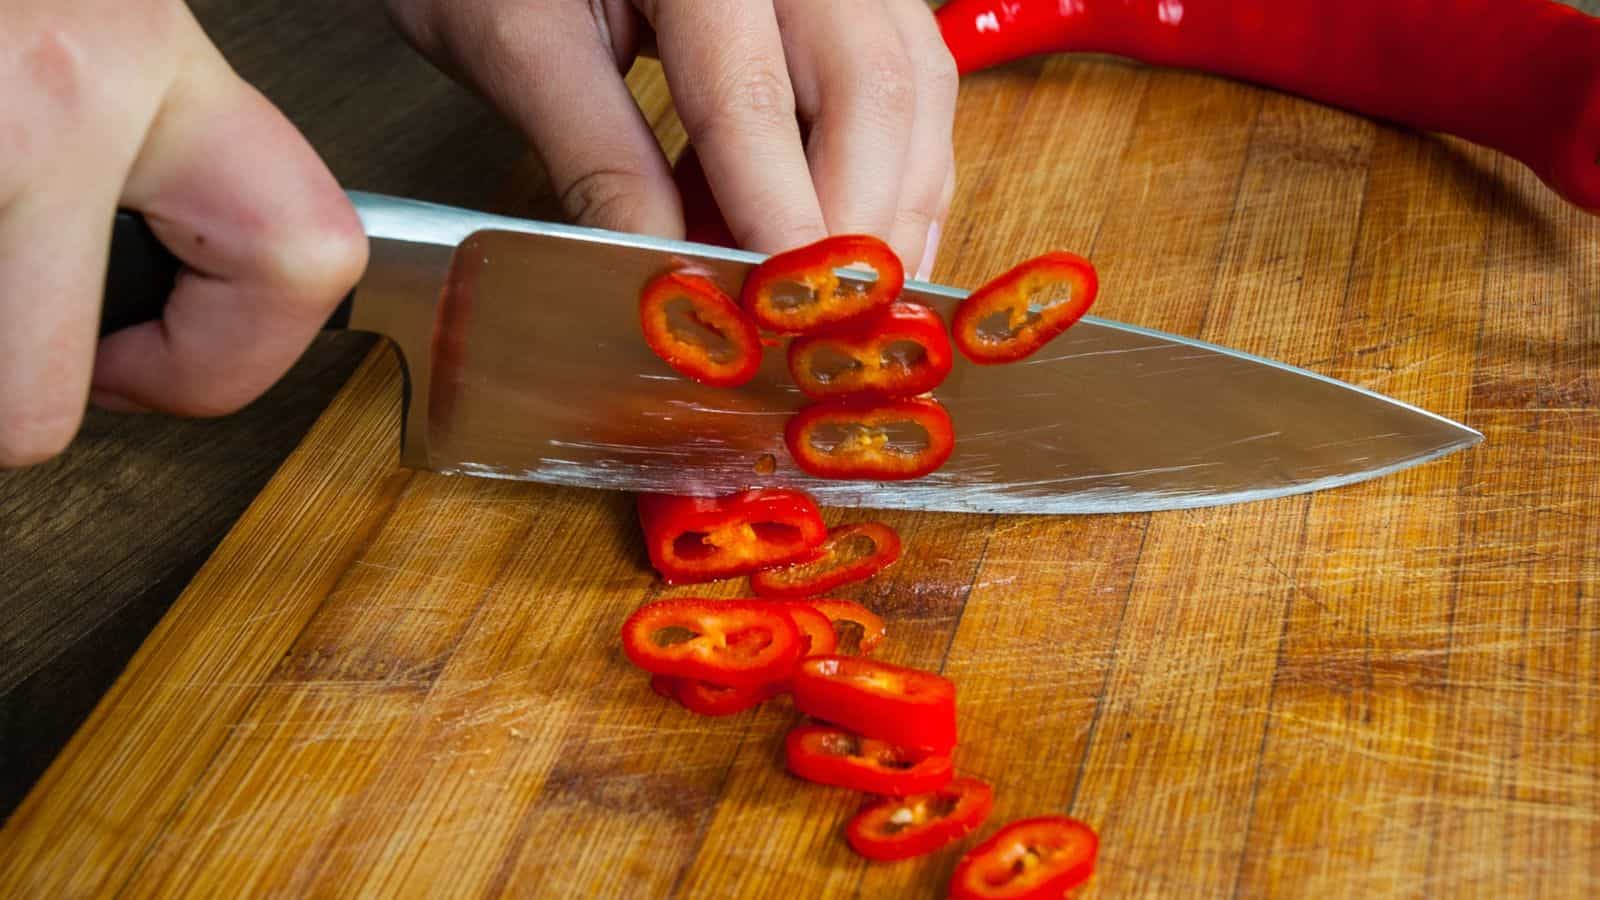 Hands chopping chili pepper on wooden board.